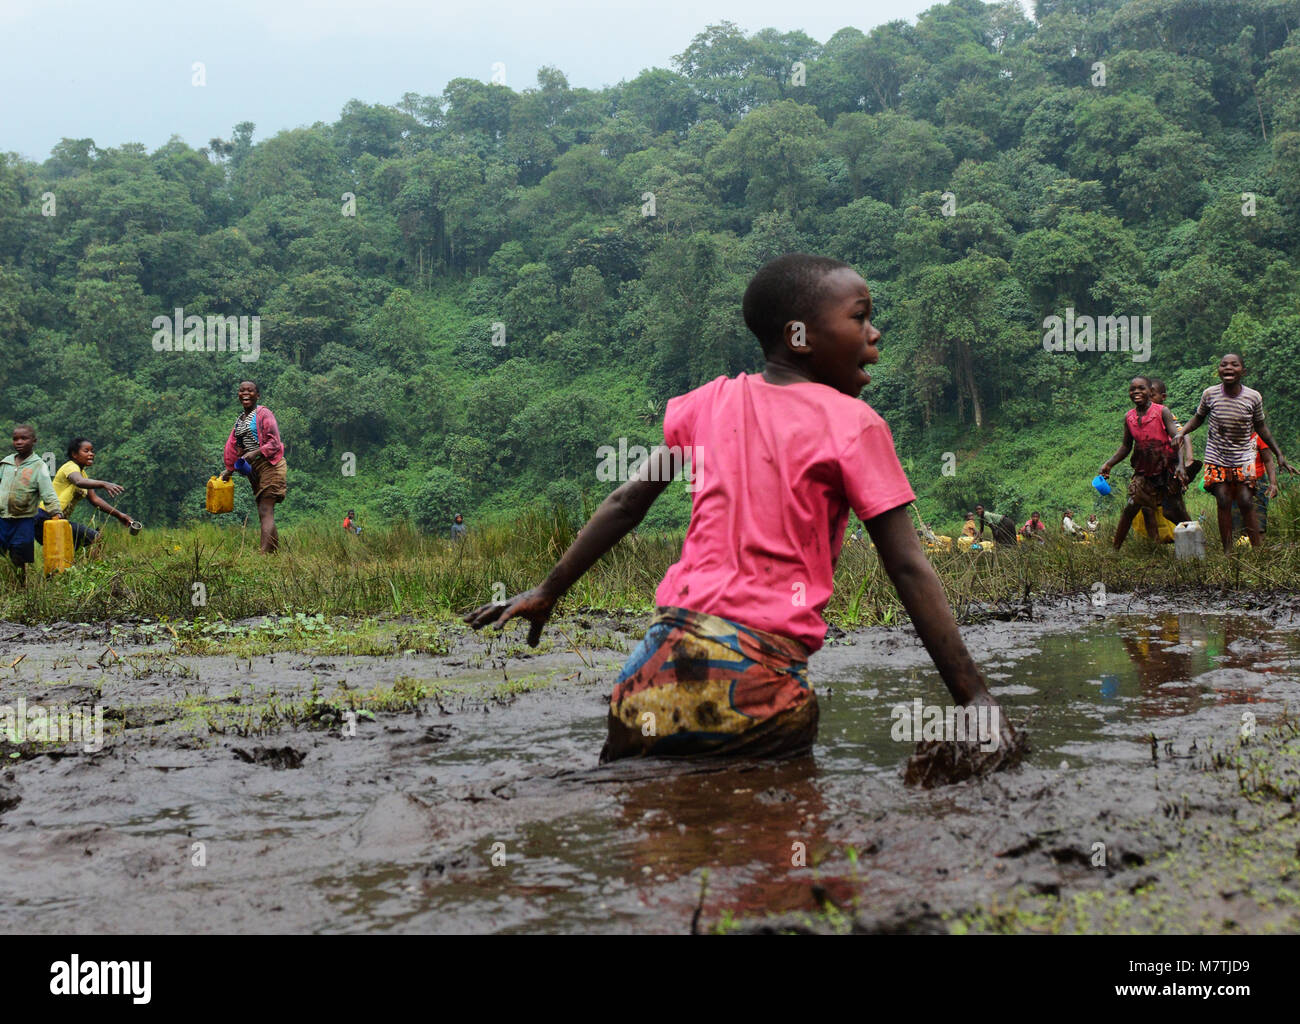 Congolese villagers fill their water supply from this Muddy pond. The only good water source they have. Stock Photo